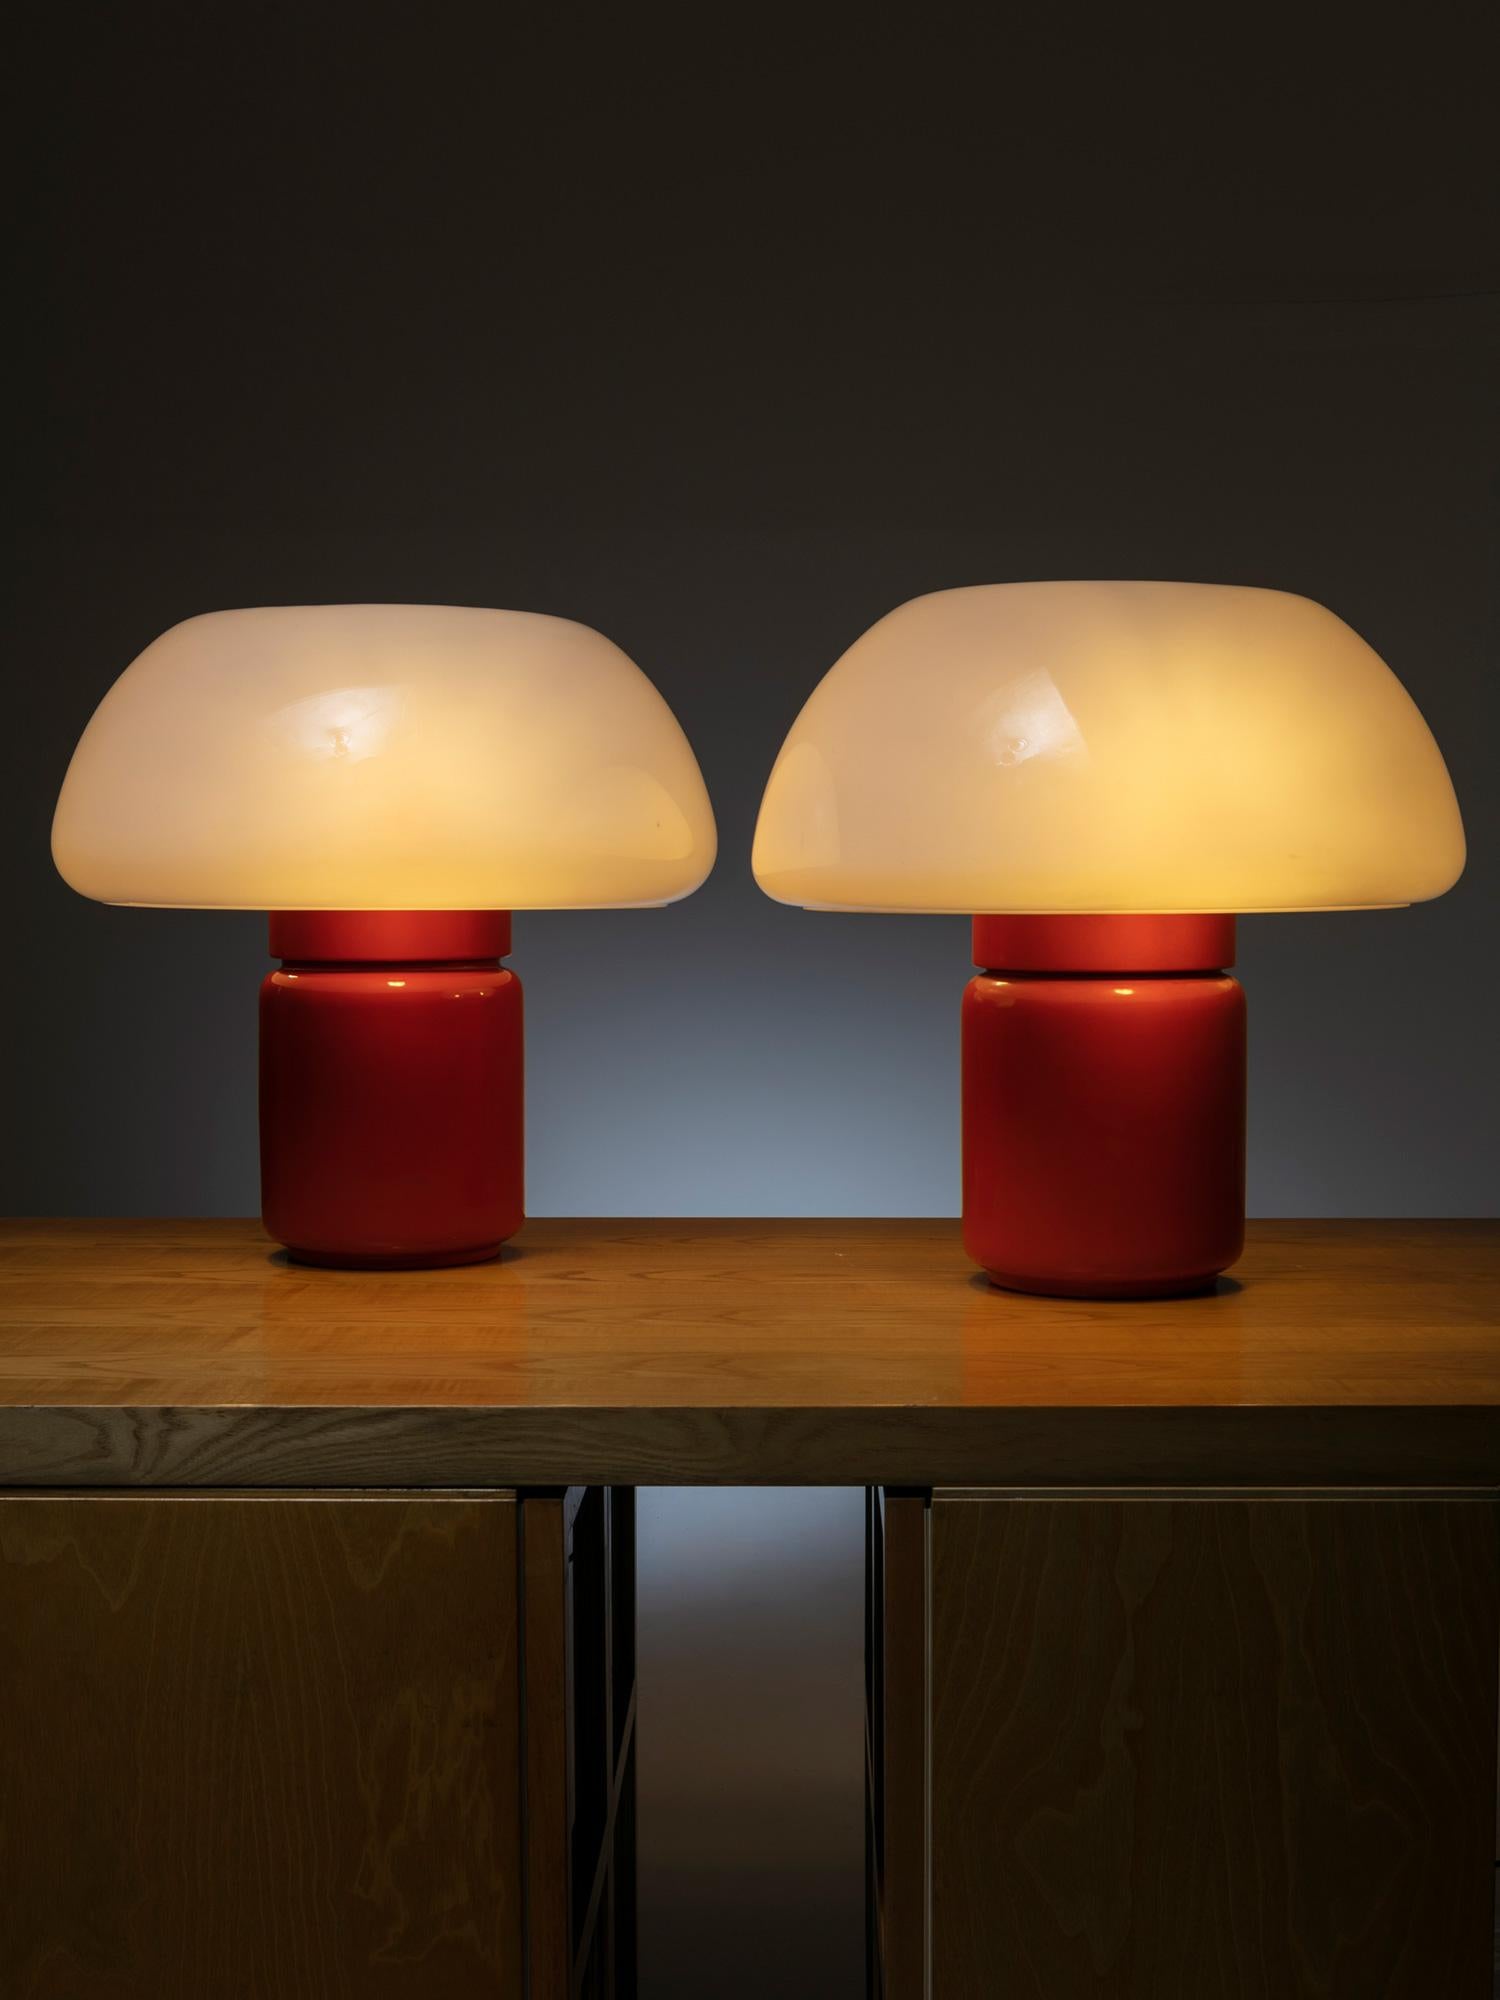 Set of two table lamps model 625 by Elio Martinelli for Martinelli Luce.
Rare orange metal body and large plastic shade